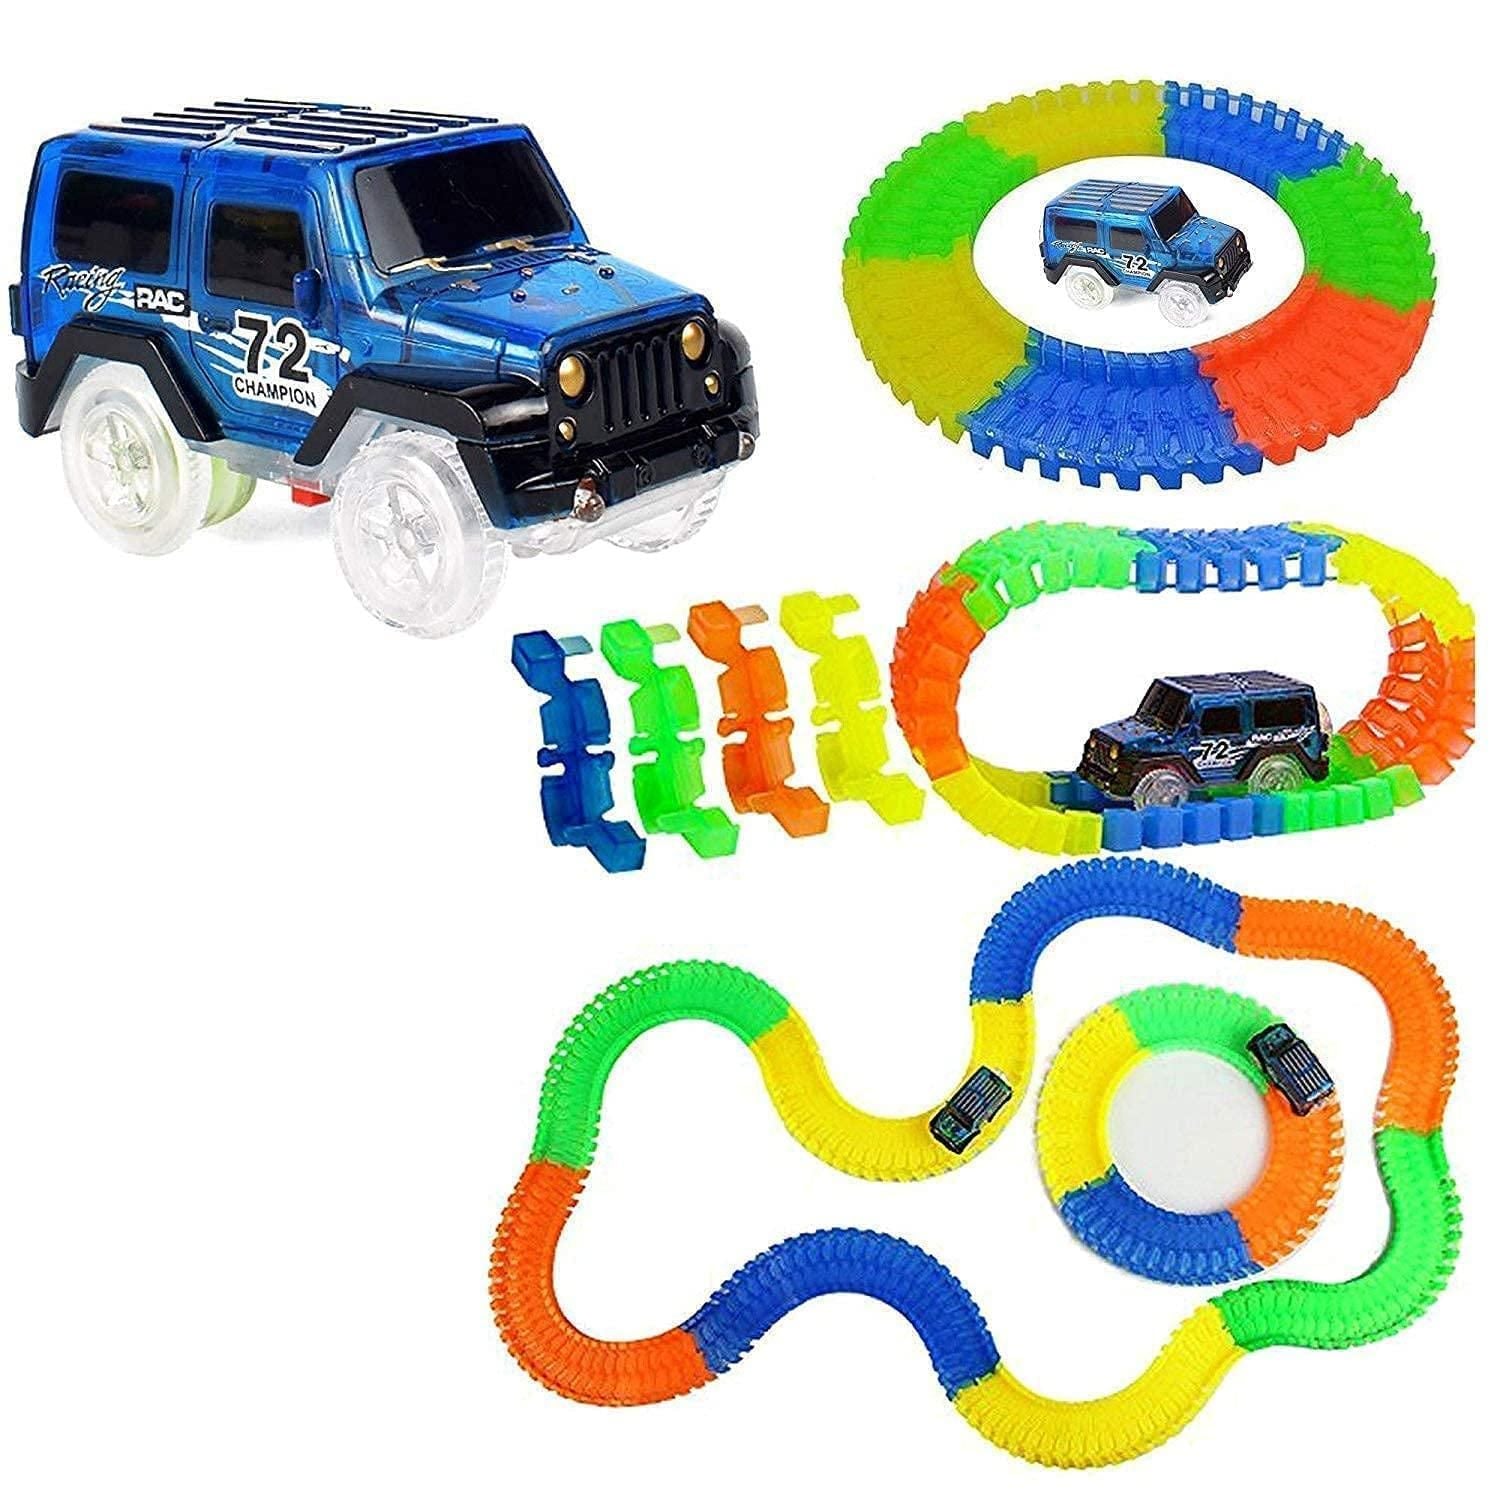 Magic Race Bend Flex and tracks - Premium  from Roposo Clout - Just $999! Shop now at Mystical9